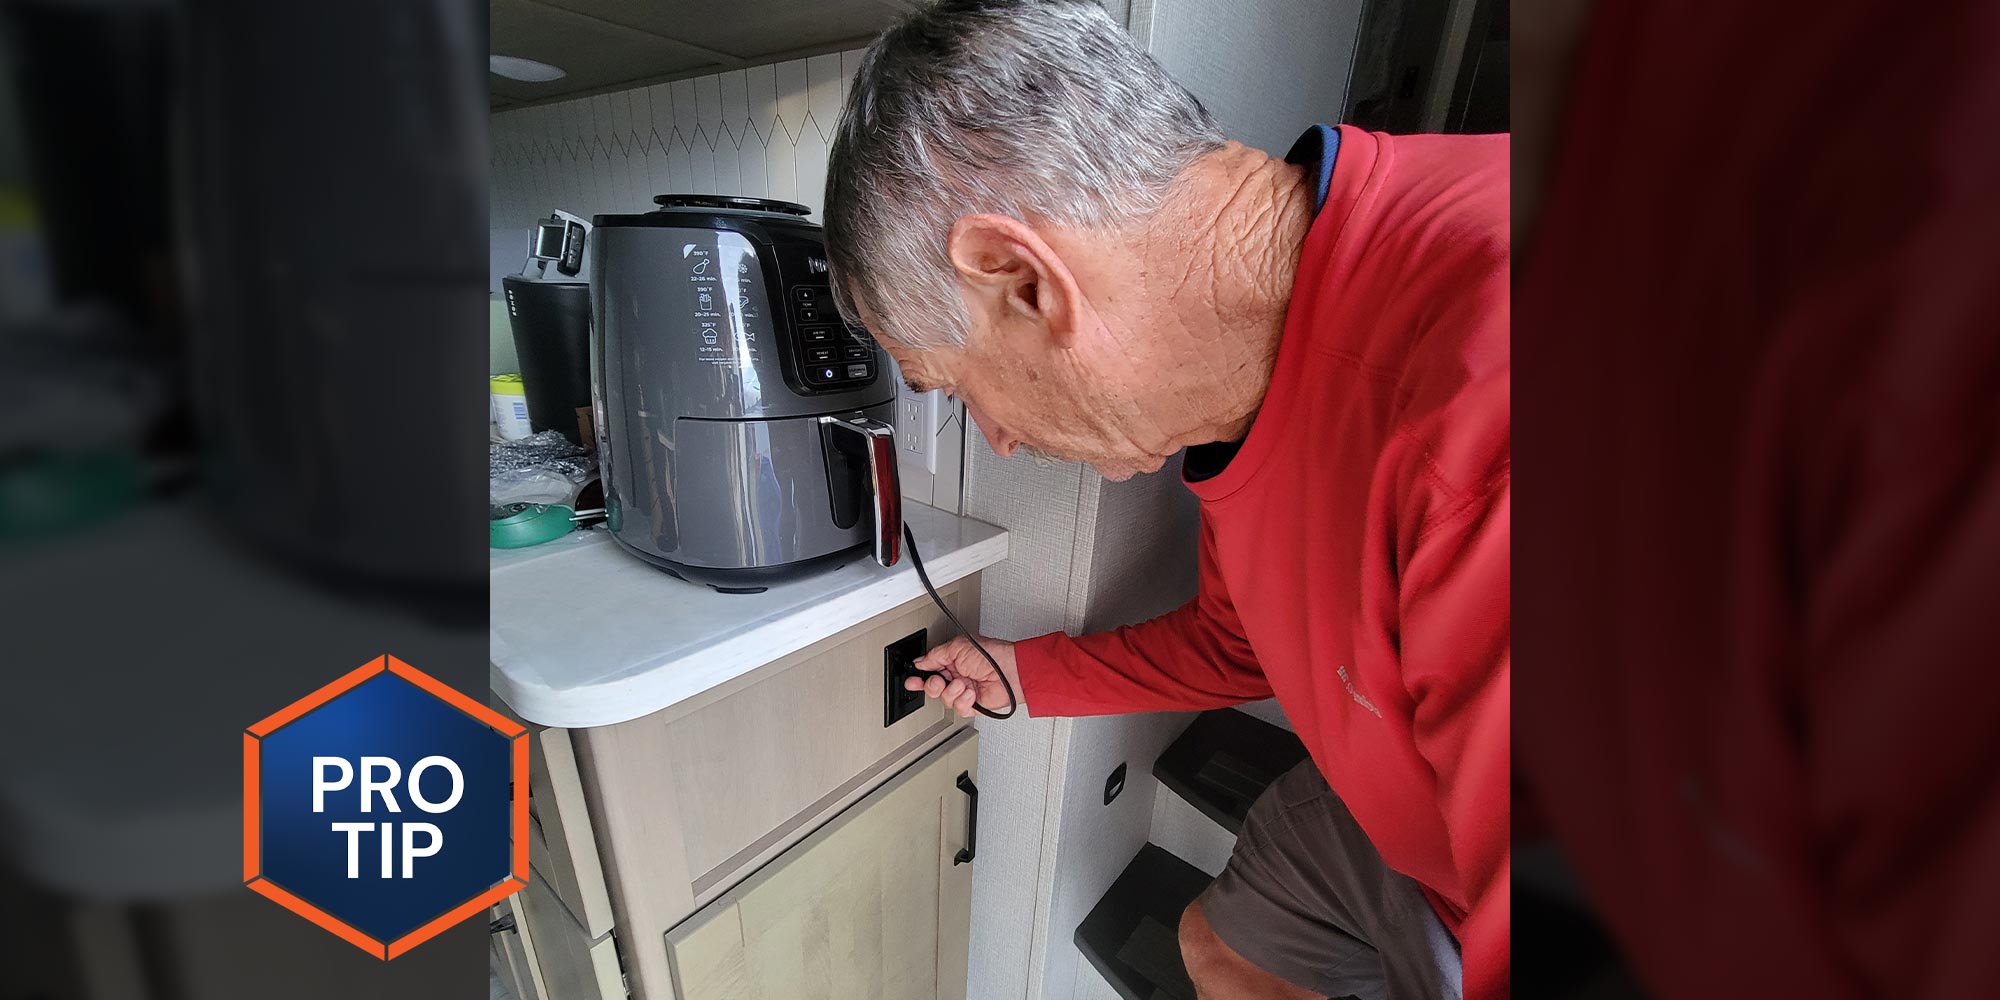 a man plugs an air-fryer into a cabinet outlet in an RV kitchen